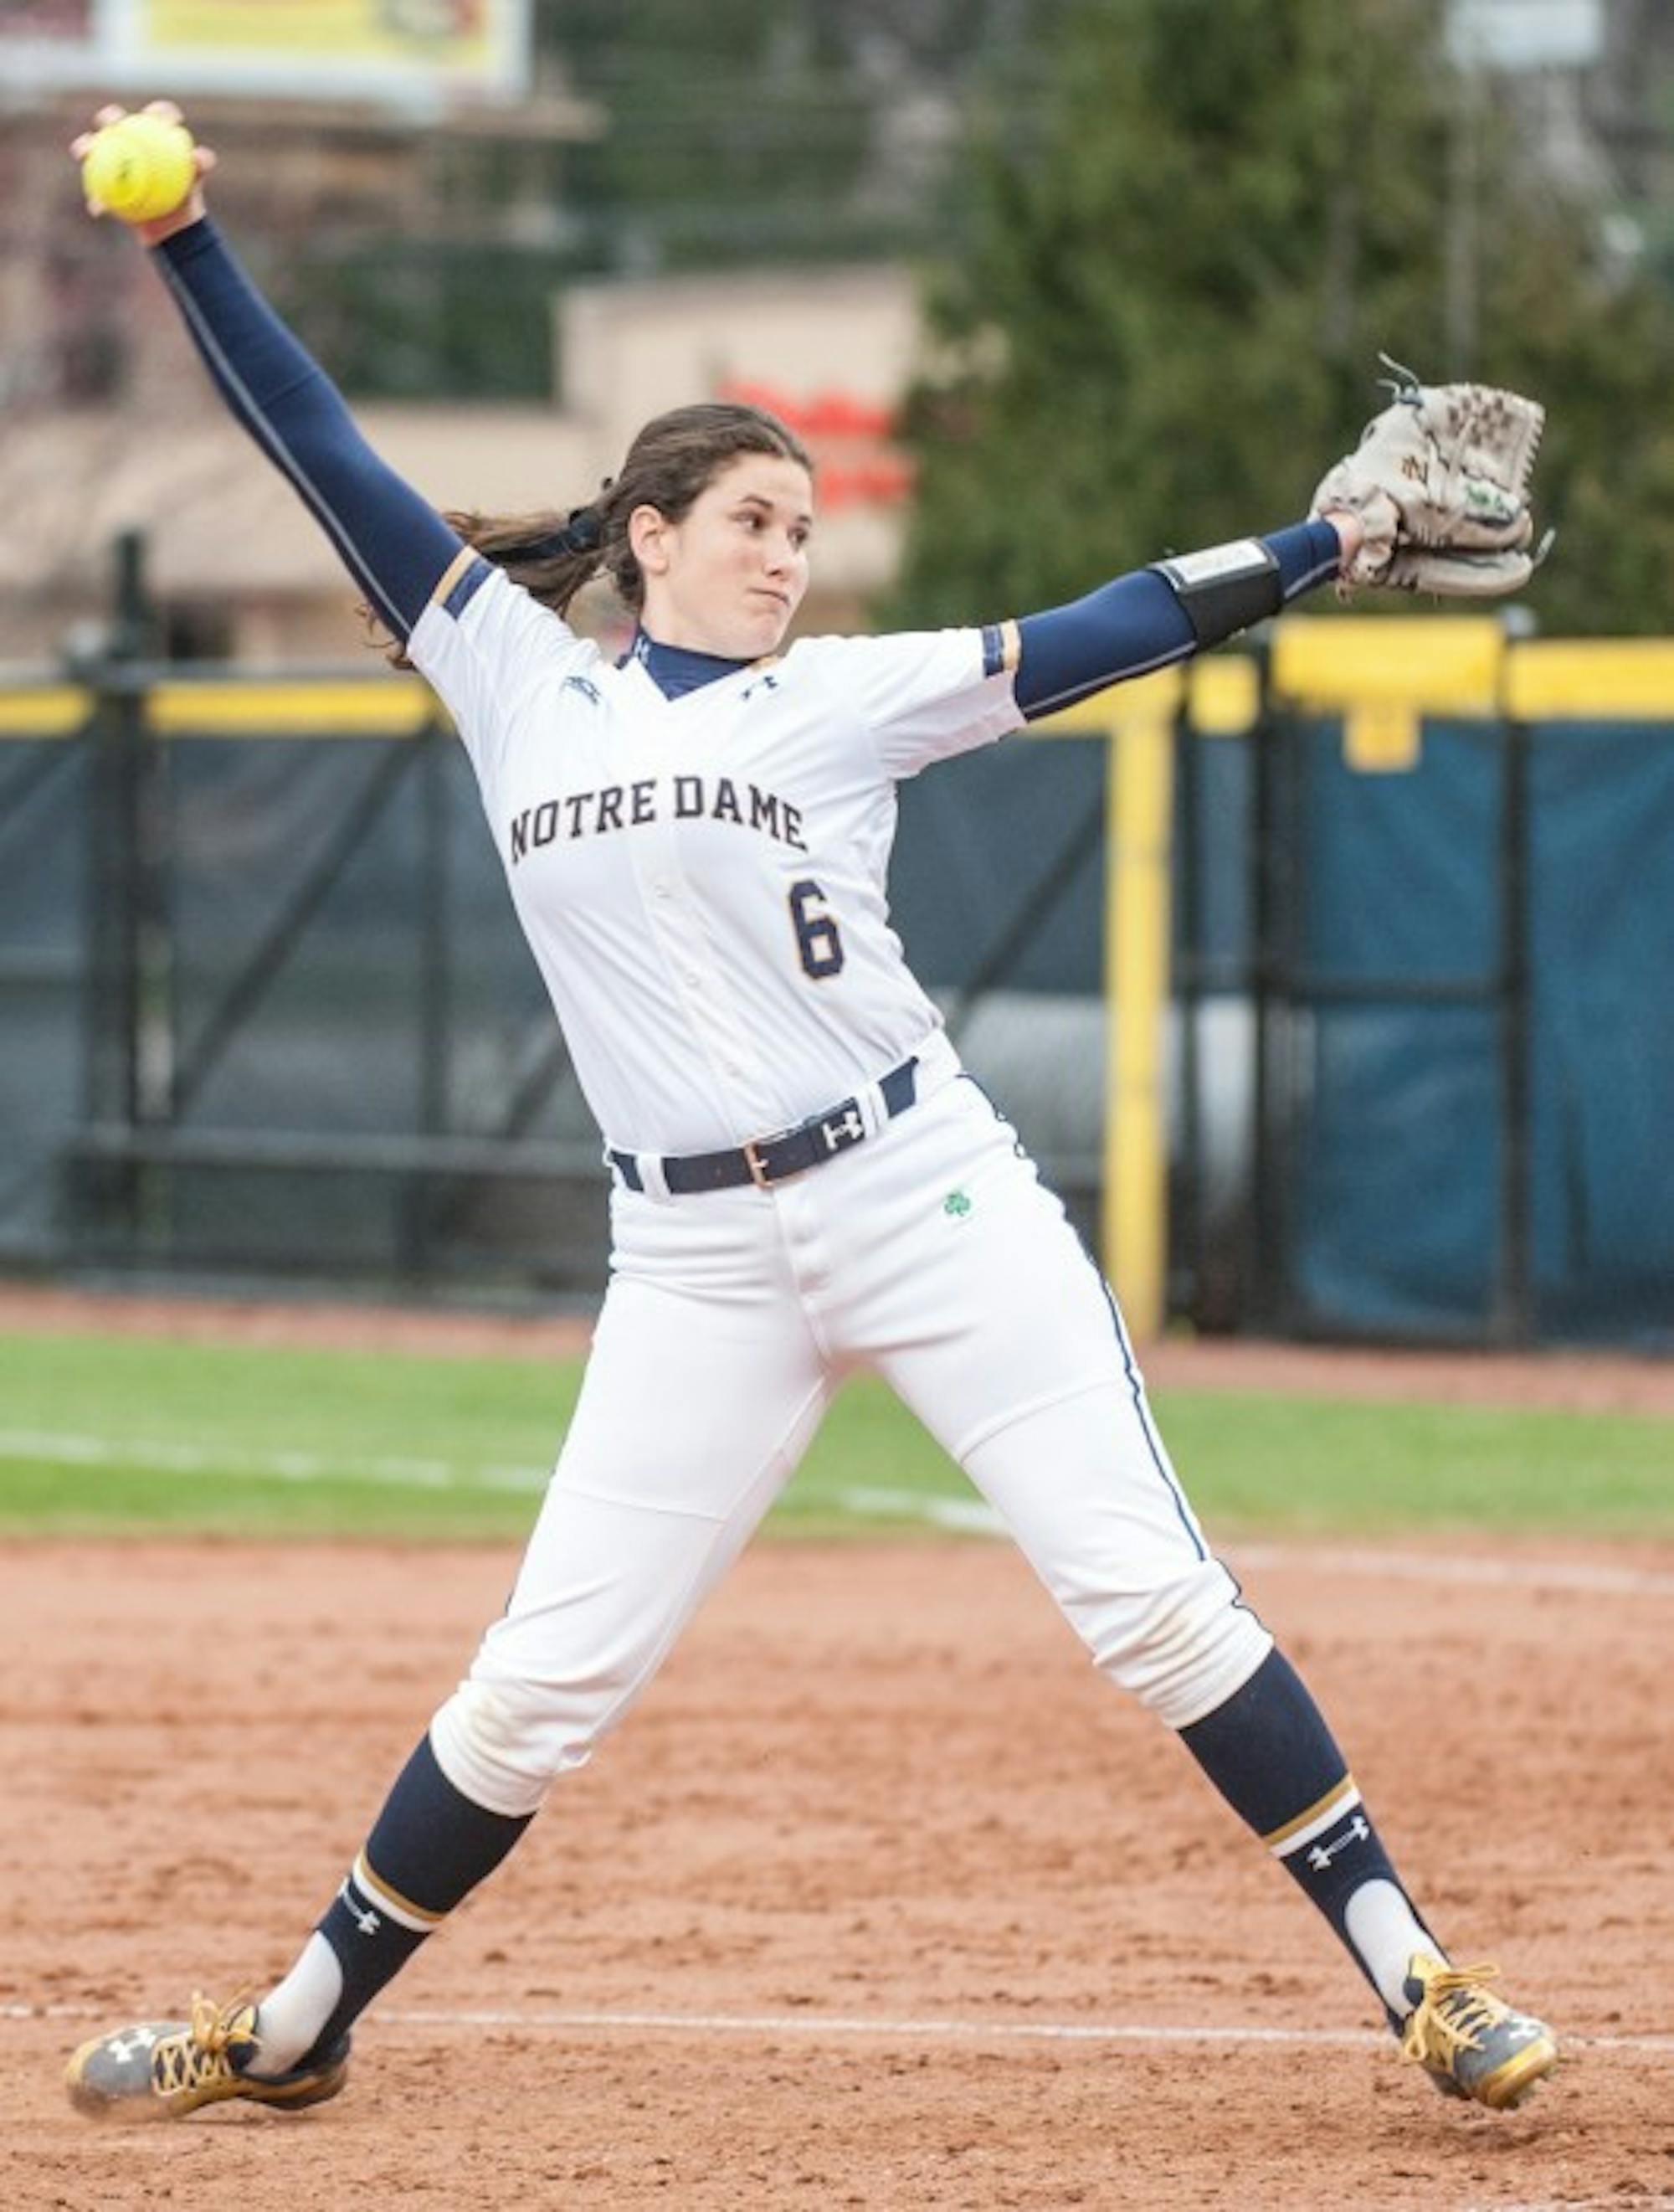 Senior Rachel Nasland pitches during Notre Dame’s 1-0 win over Eastern Michigan on Wednesday at Melissa Cook Stadium.